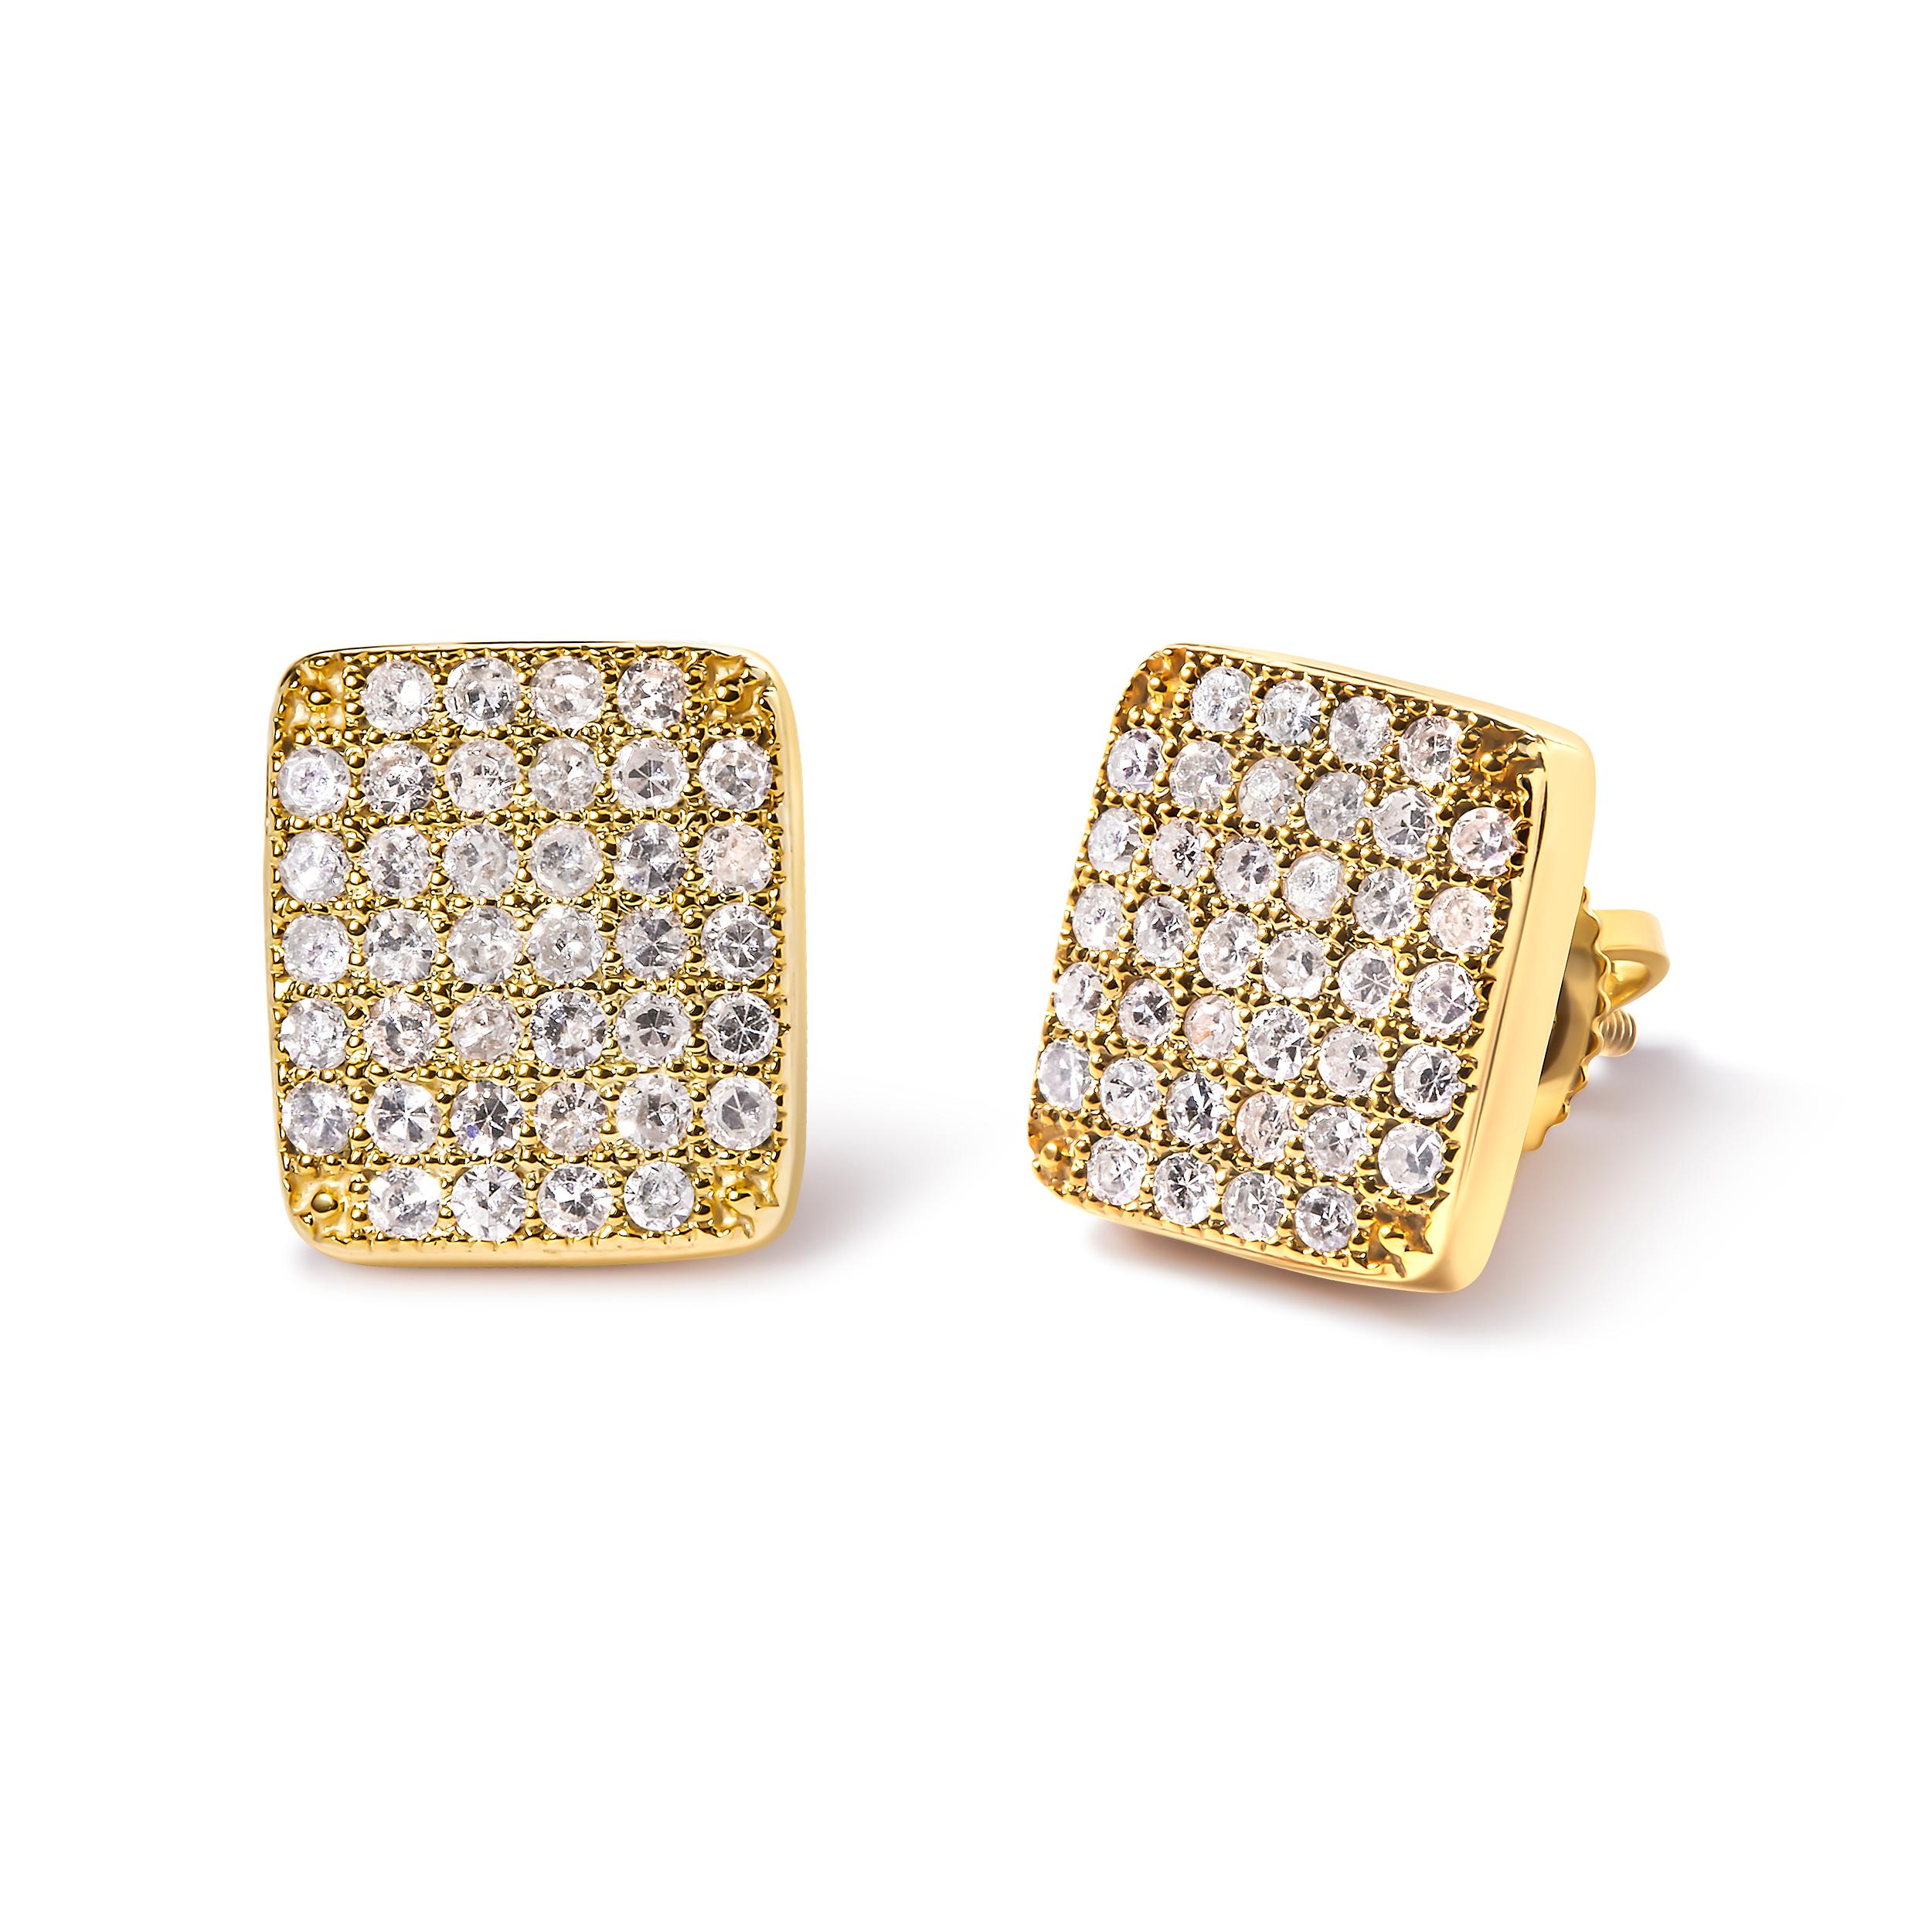 Indulge in the ultimate luxury with these 14K Yellow Gold Diamond Square Shaped Composite Cluster Stud Earrings. Crafted with natural diamonds, these earrings boast 76 round diamonds with a total weight of 0.50 cttw. The diamonds are set in a prong